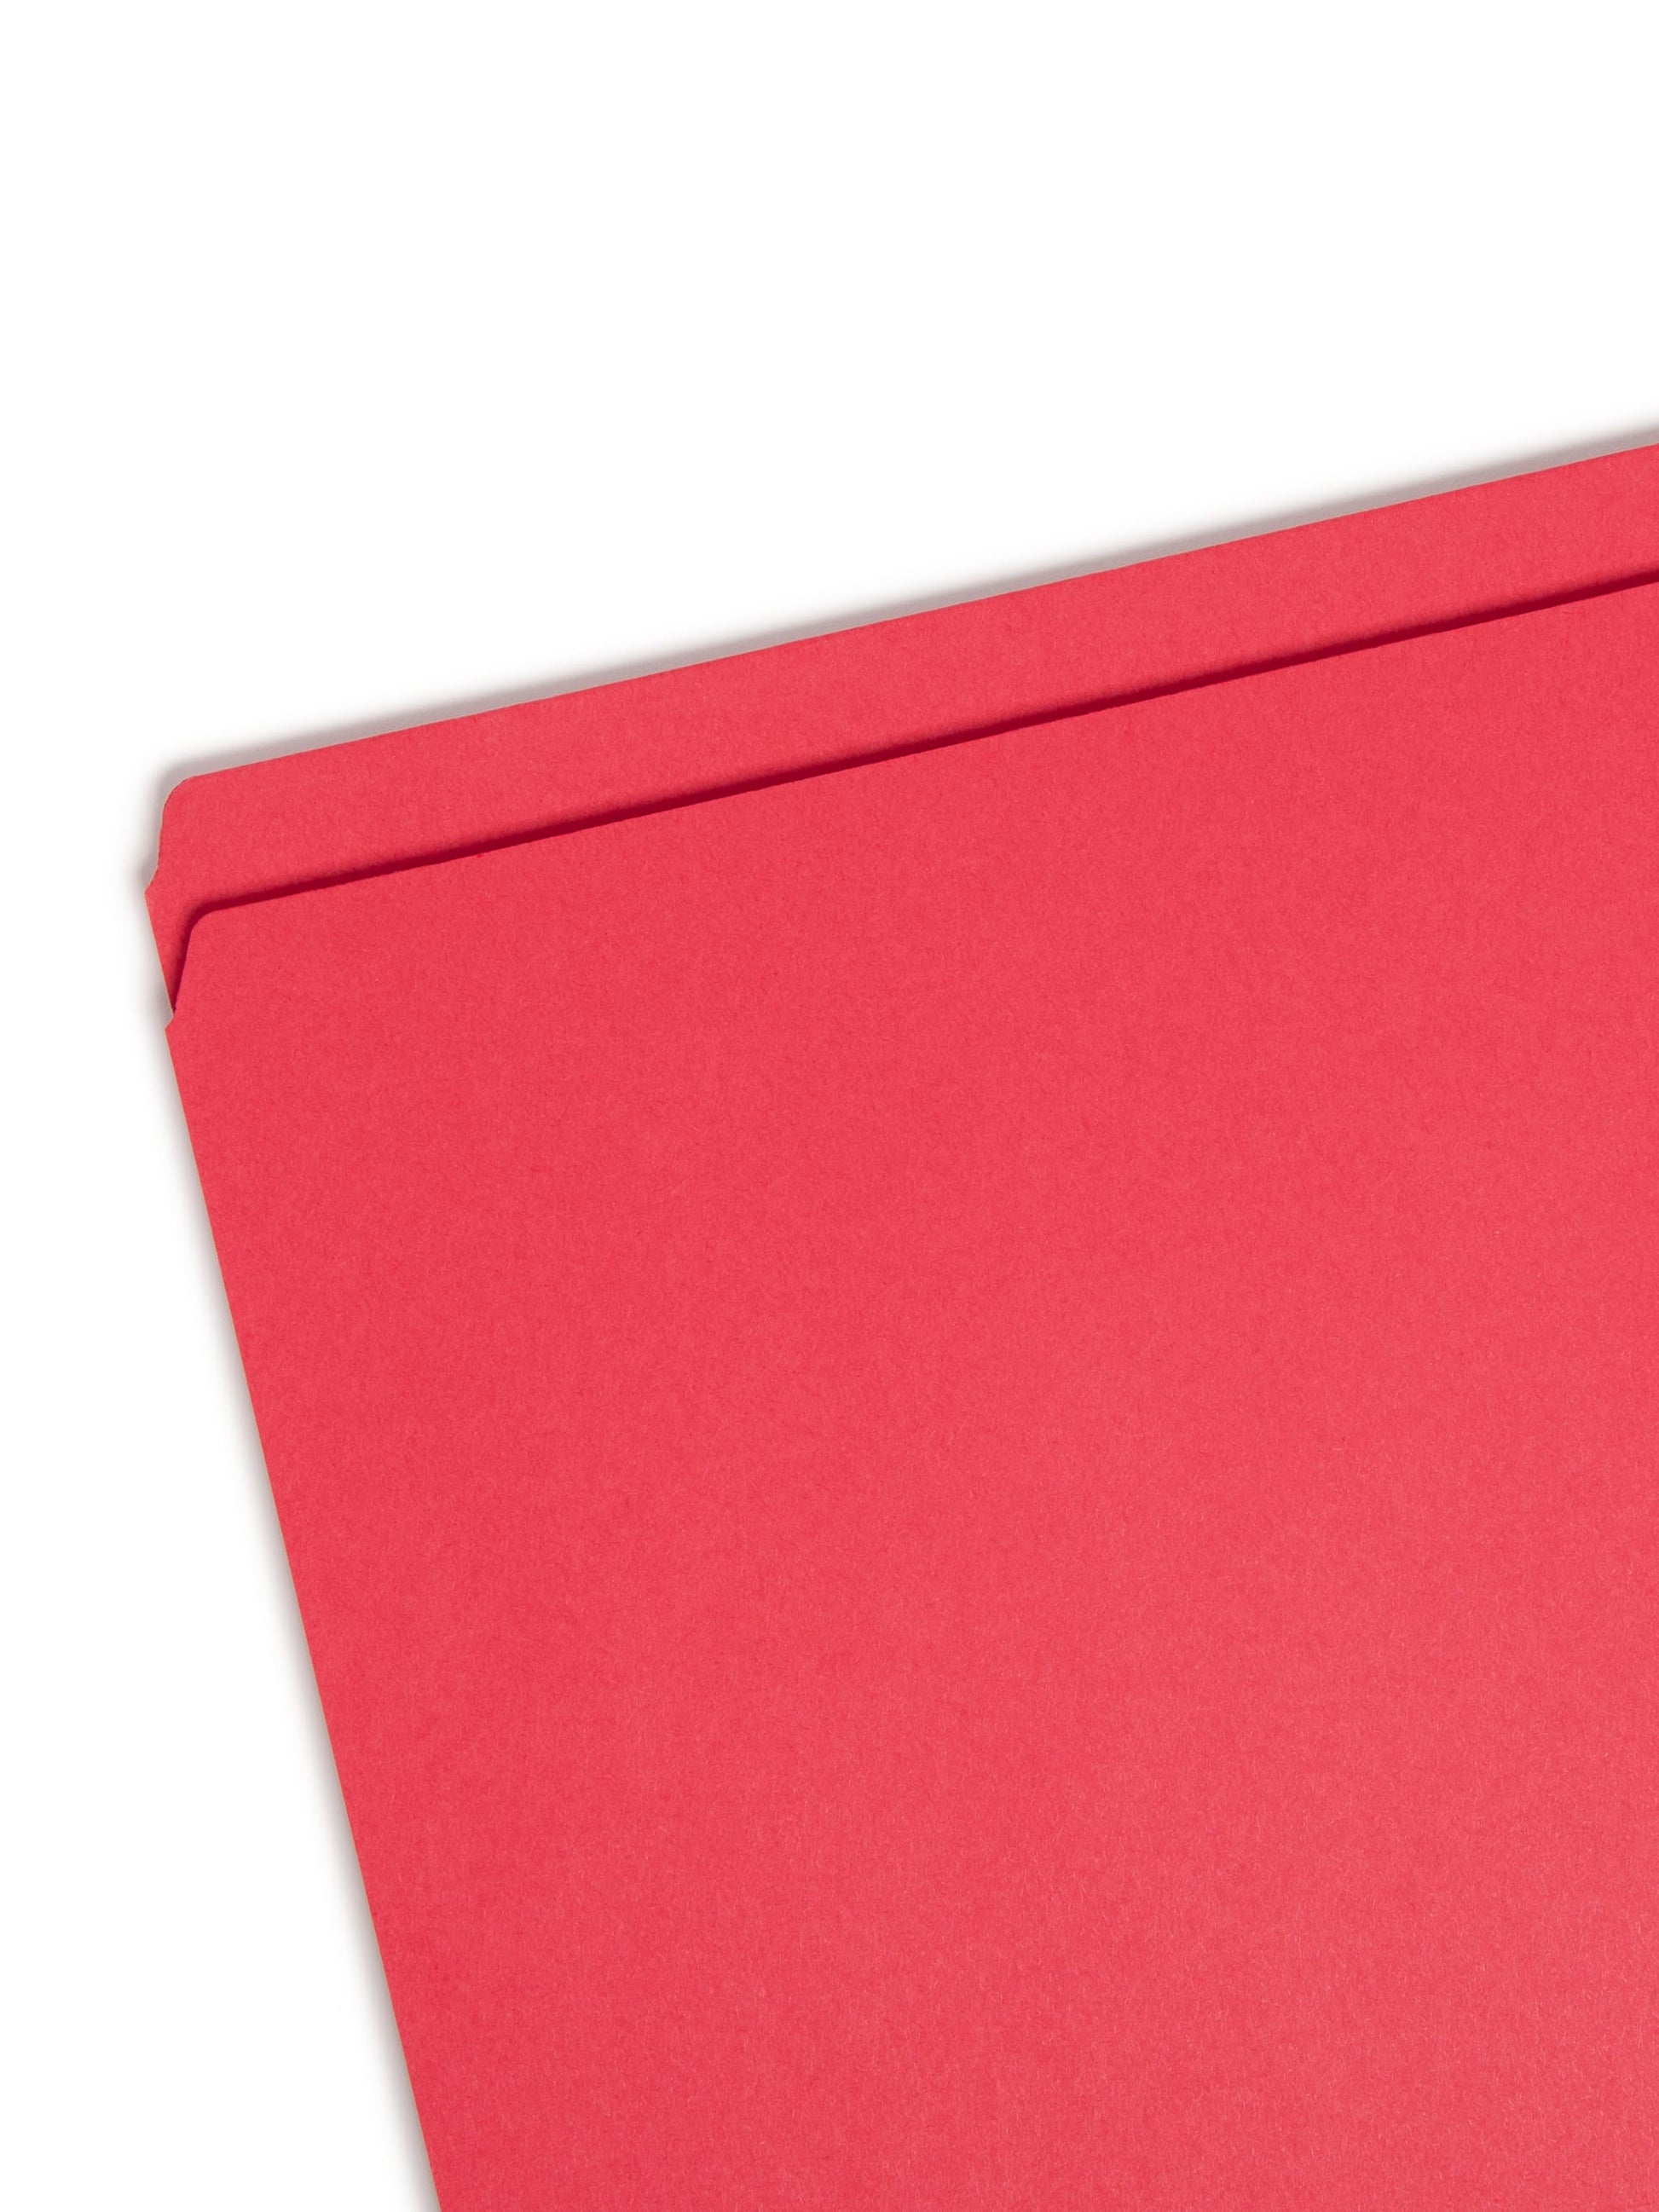 Reinforced Tab File Folders, Straight-Cut Tab, Red Color, Legal Size, Set of 100, 086486177108